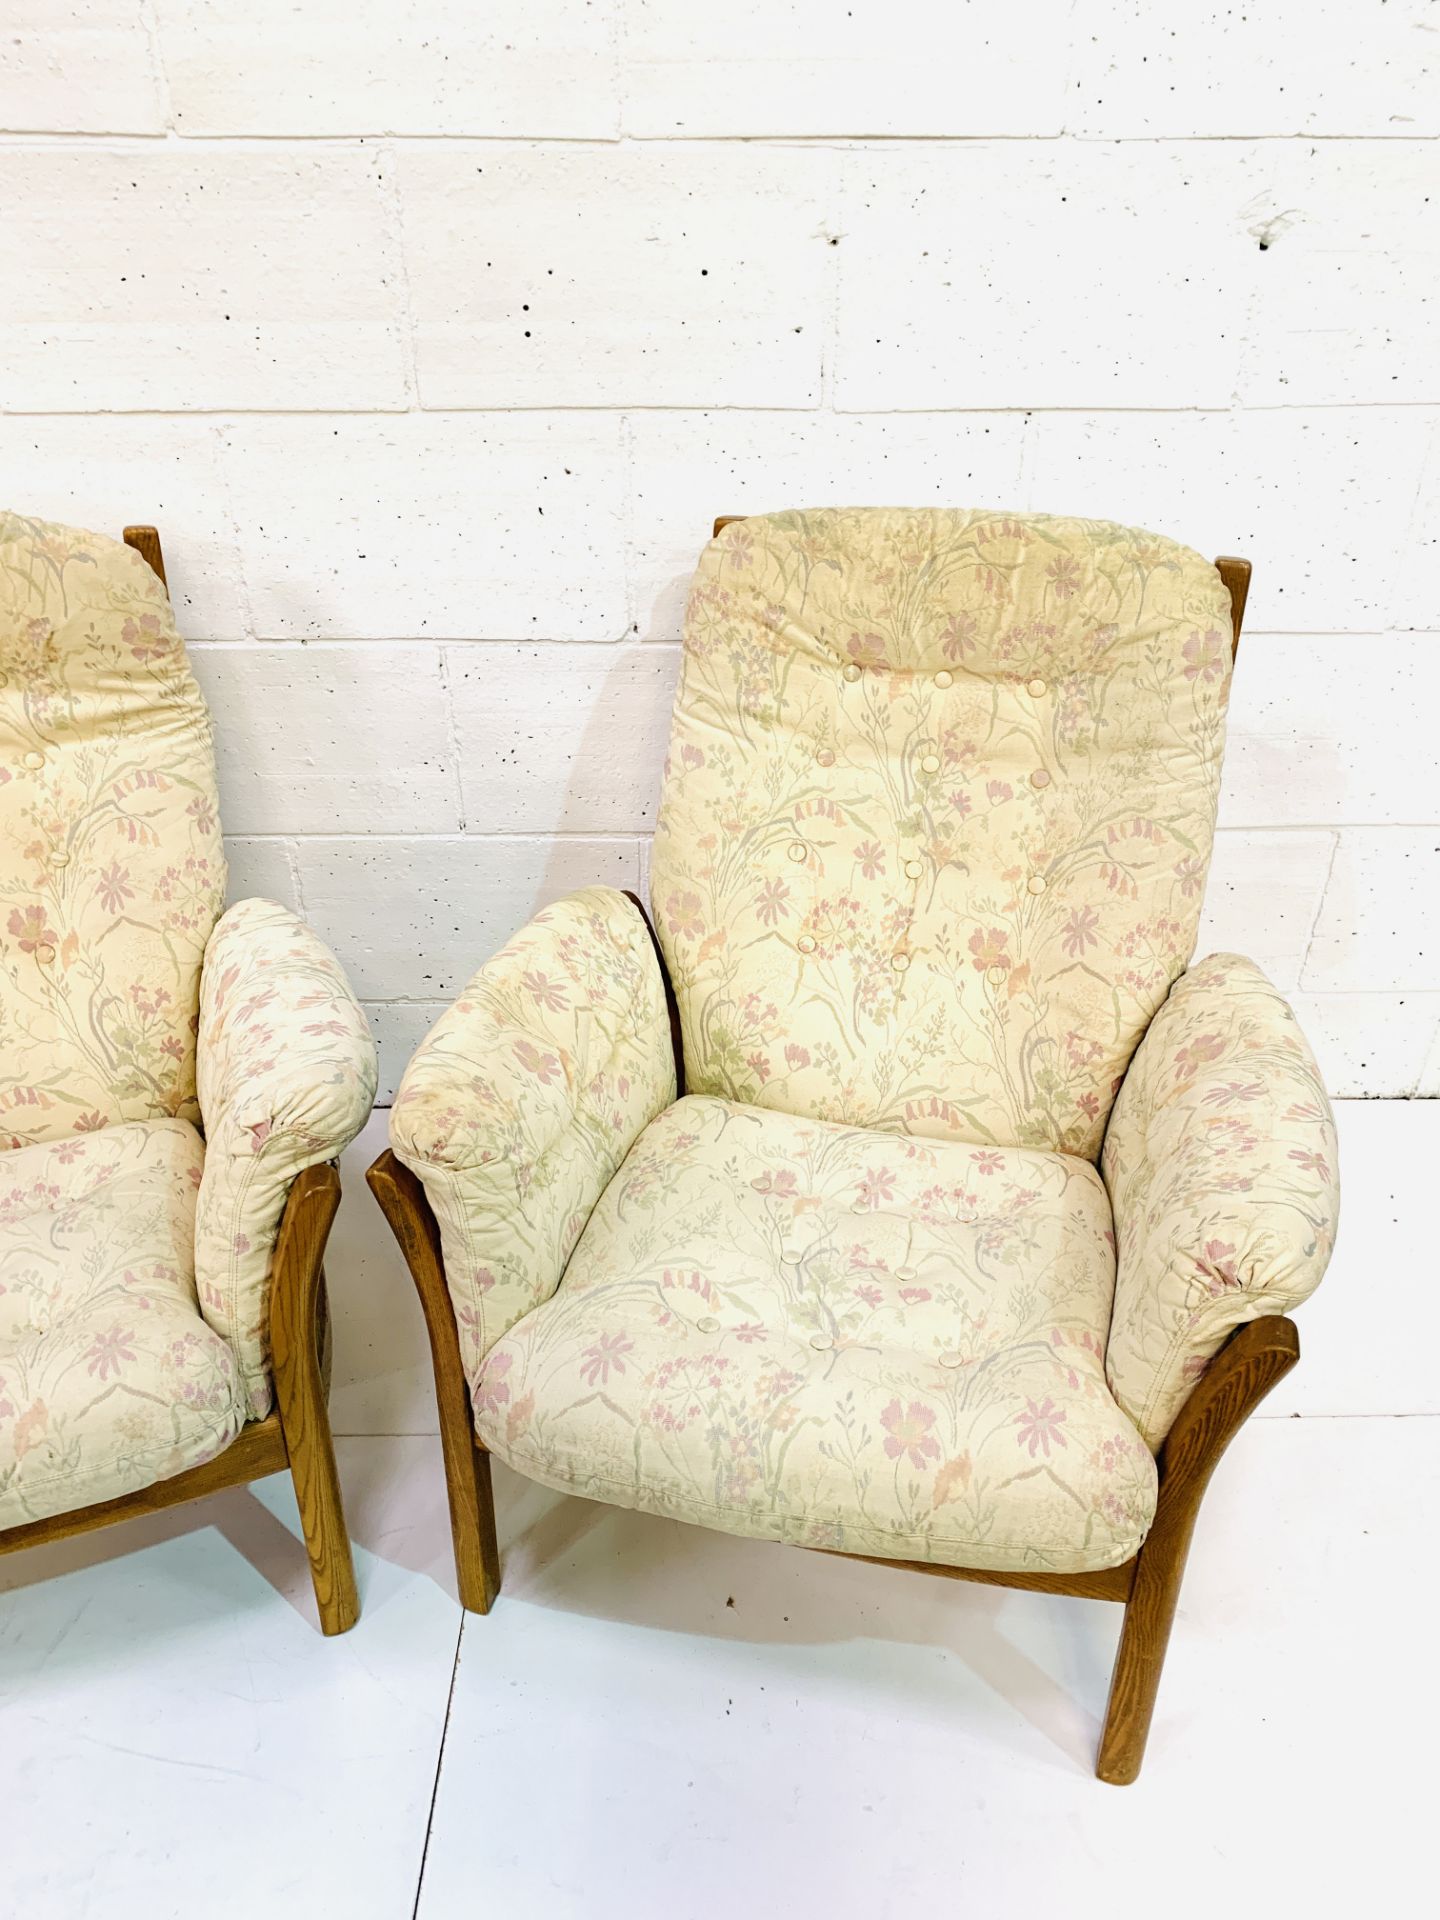 Pair of Ercol armchairs - Image 2 of 5